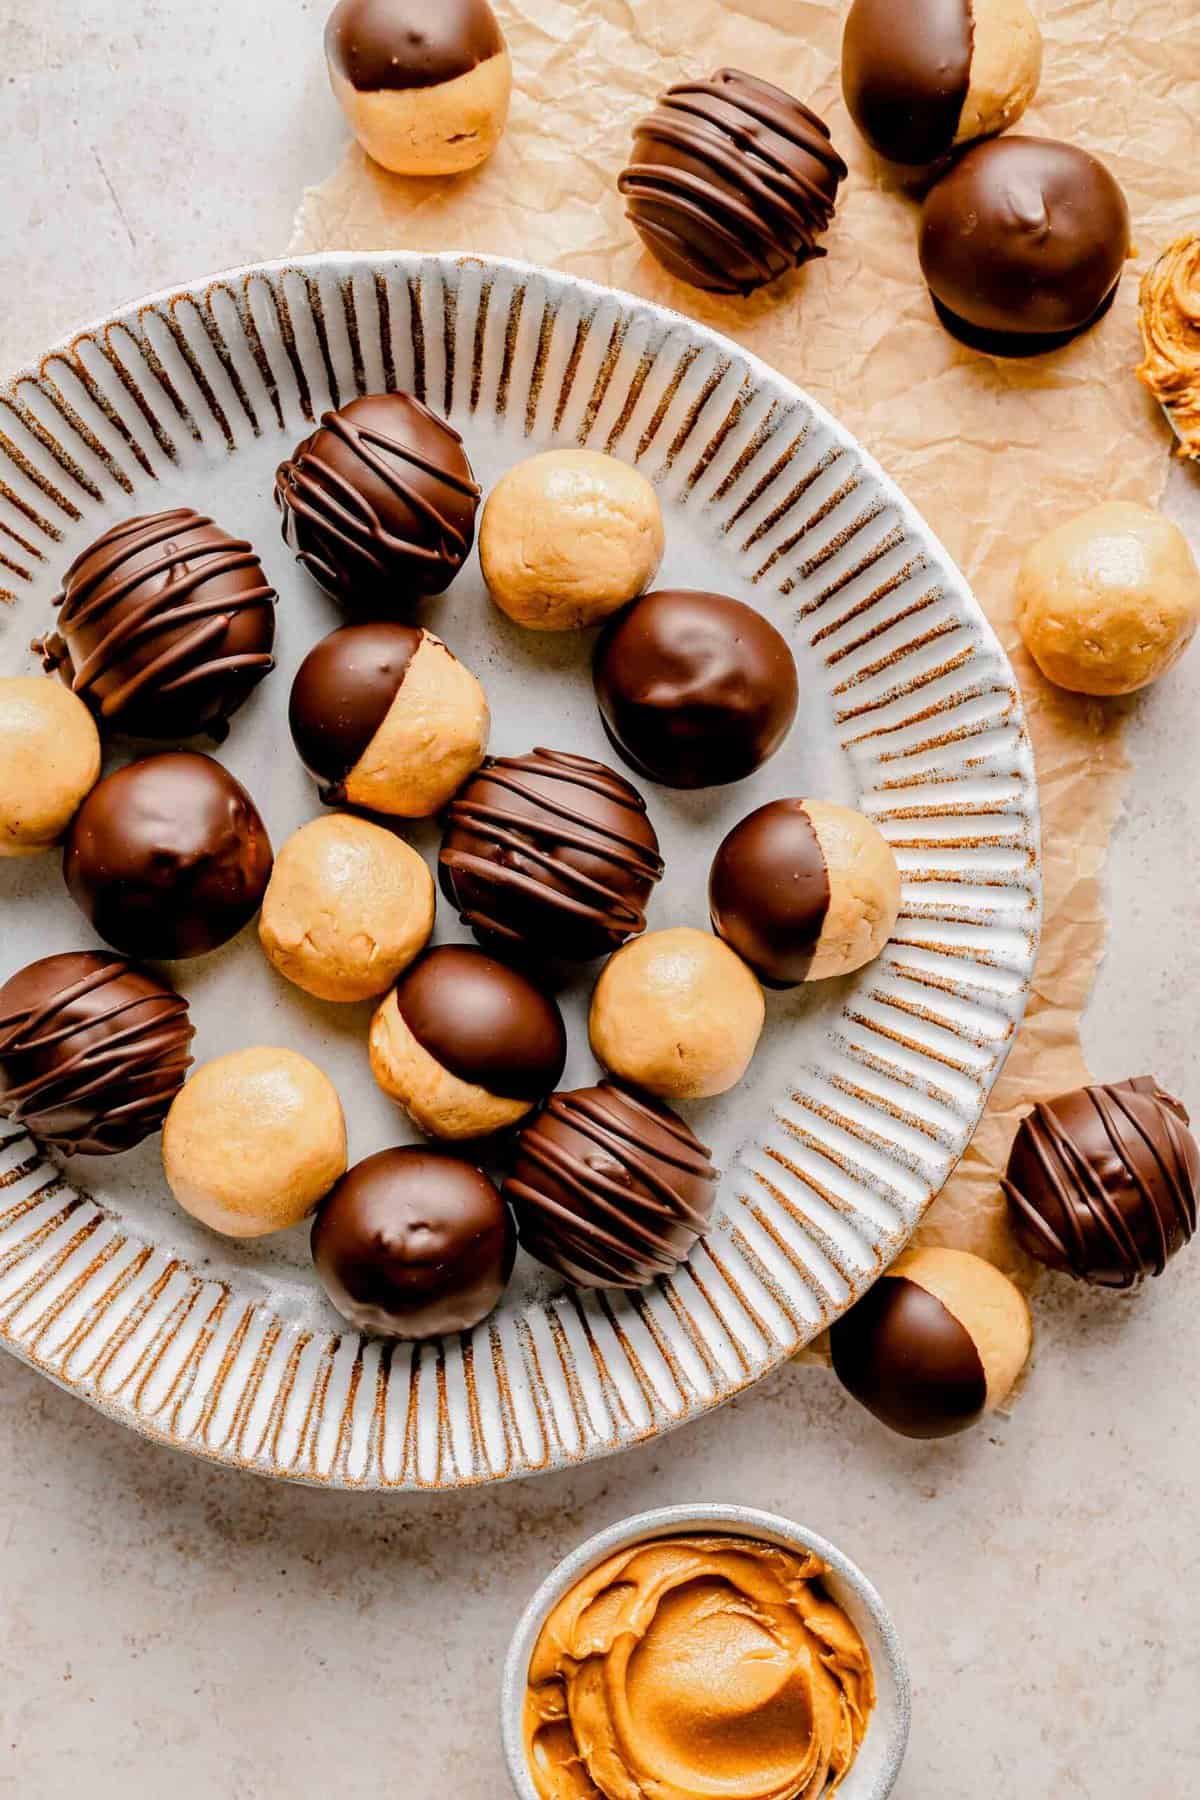 Overhead image of peanut butter balls on a plate.